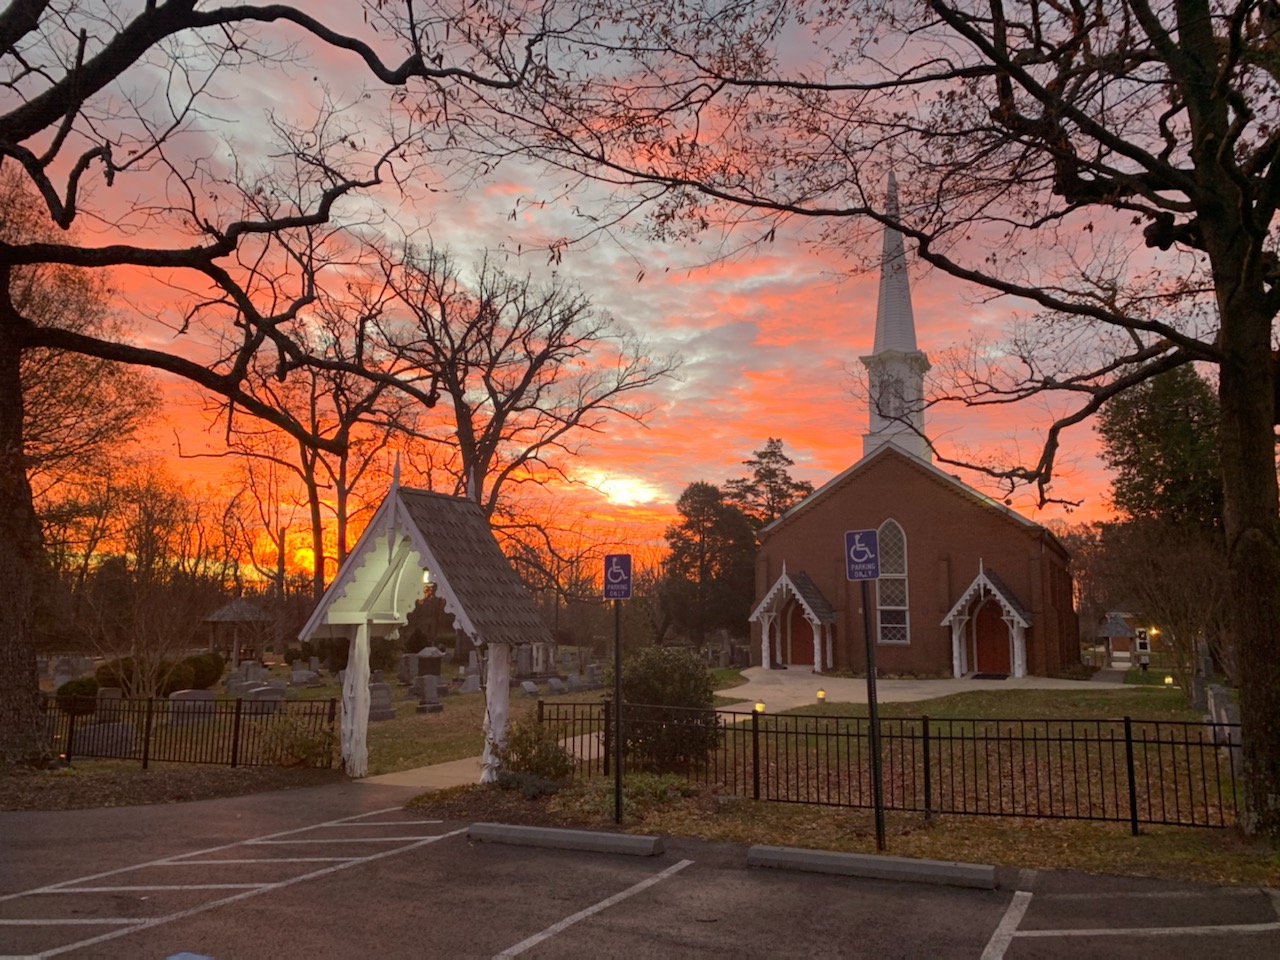 Sunset Picture of Church.jpg